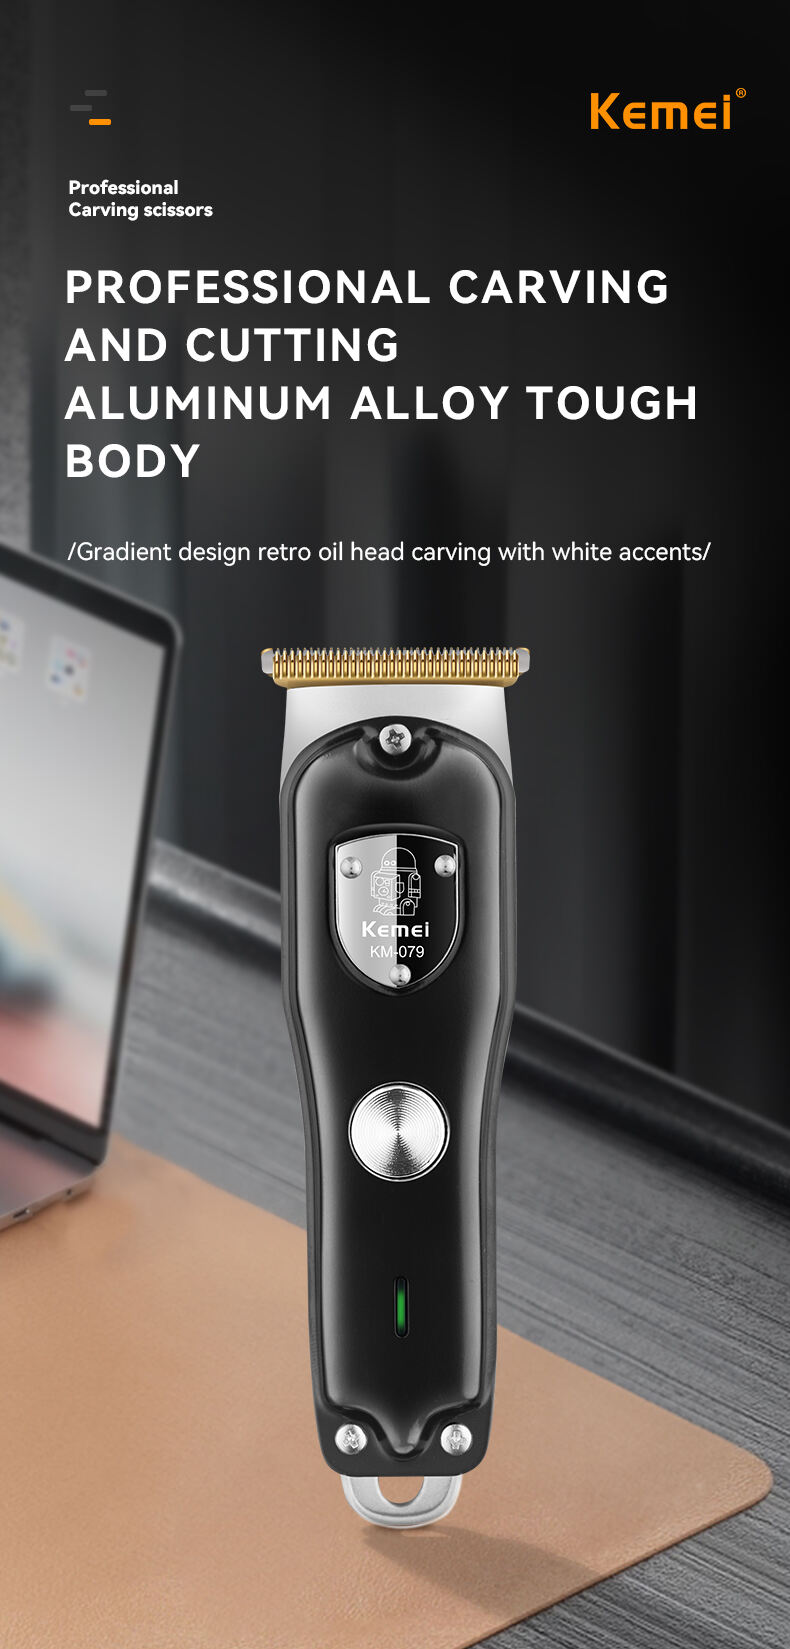 USB Barber Waterproof Electric cordless professional hair clippers and hair trimmer details